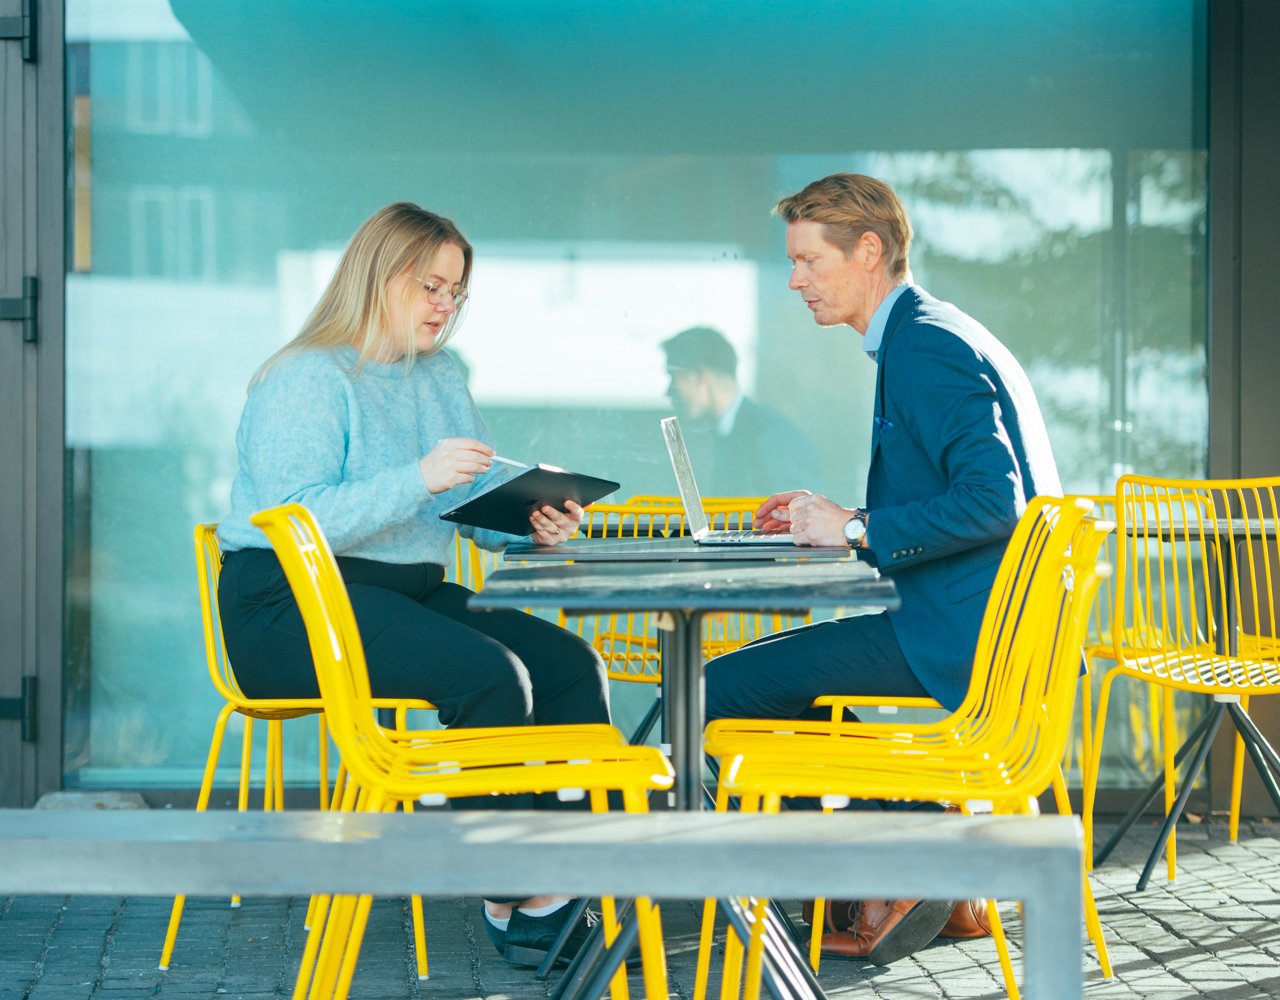 A woman and a man are sitting in a cafe with yellow chairs and working.